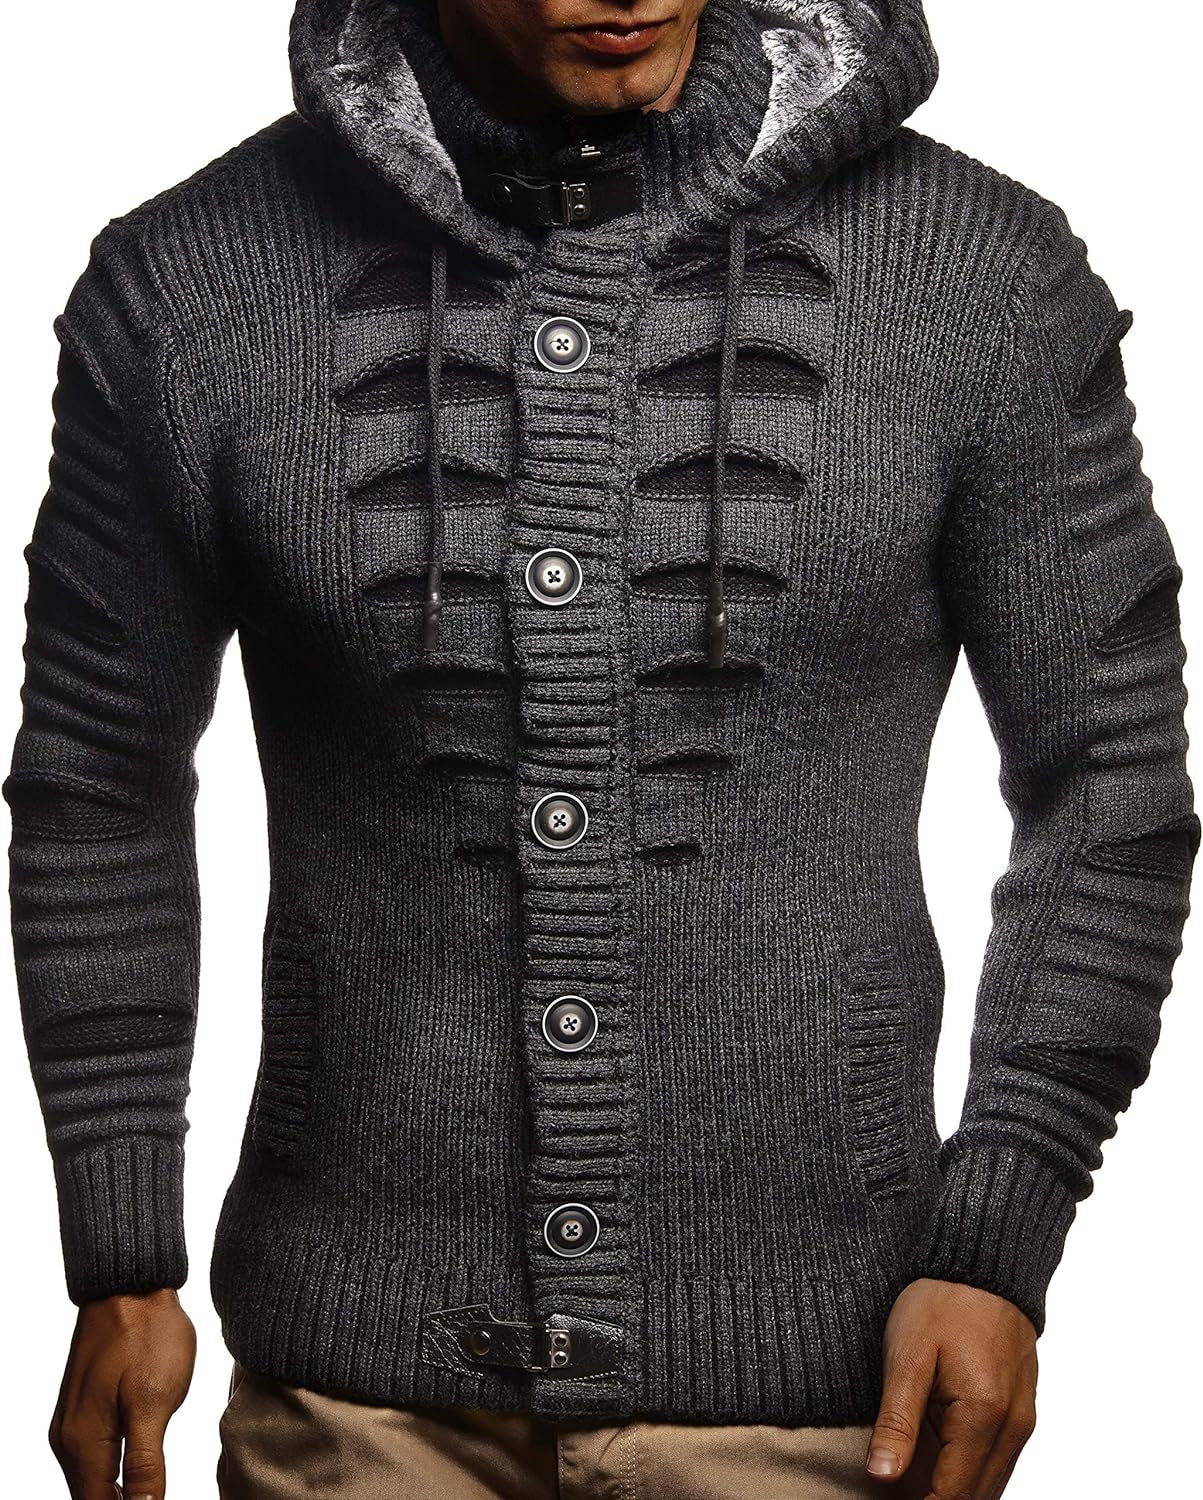 Men'S Stylish Knit Sweater with Buttons | Knitted Sweatshirt Pullover with Hood | Warm for Winter | LN5605